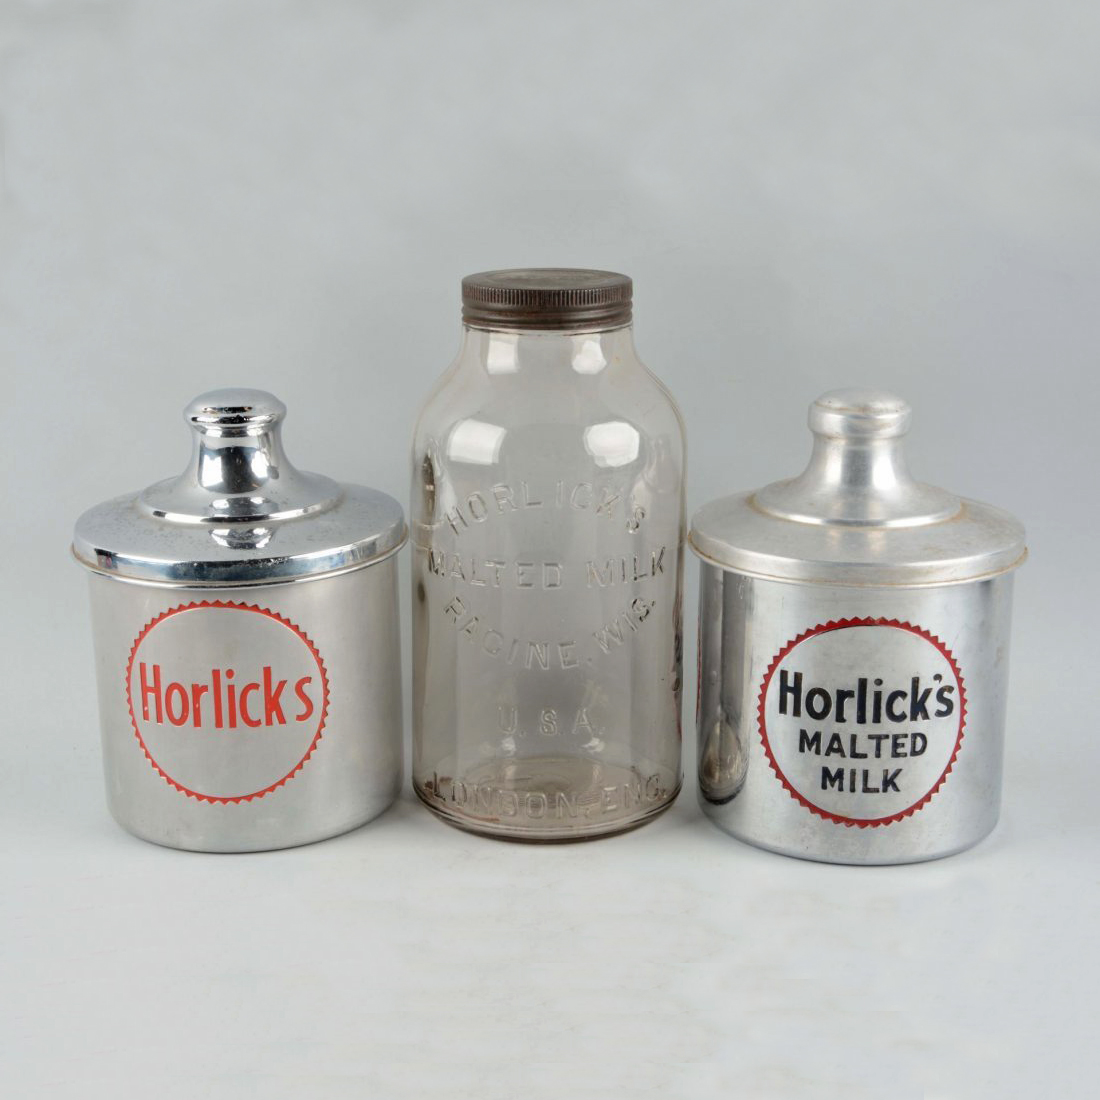 Read more about the article OBJECT HISTORY: Horlick’s Malted Milk